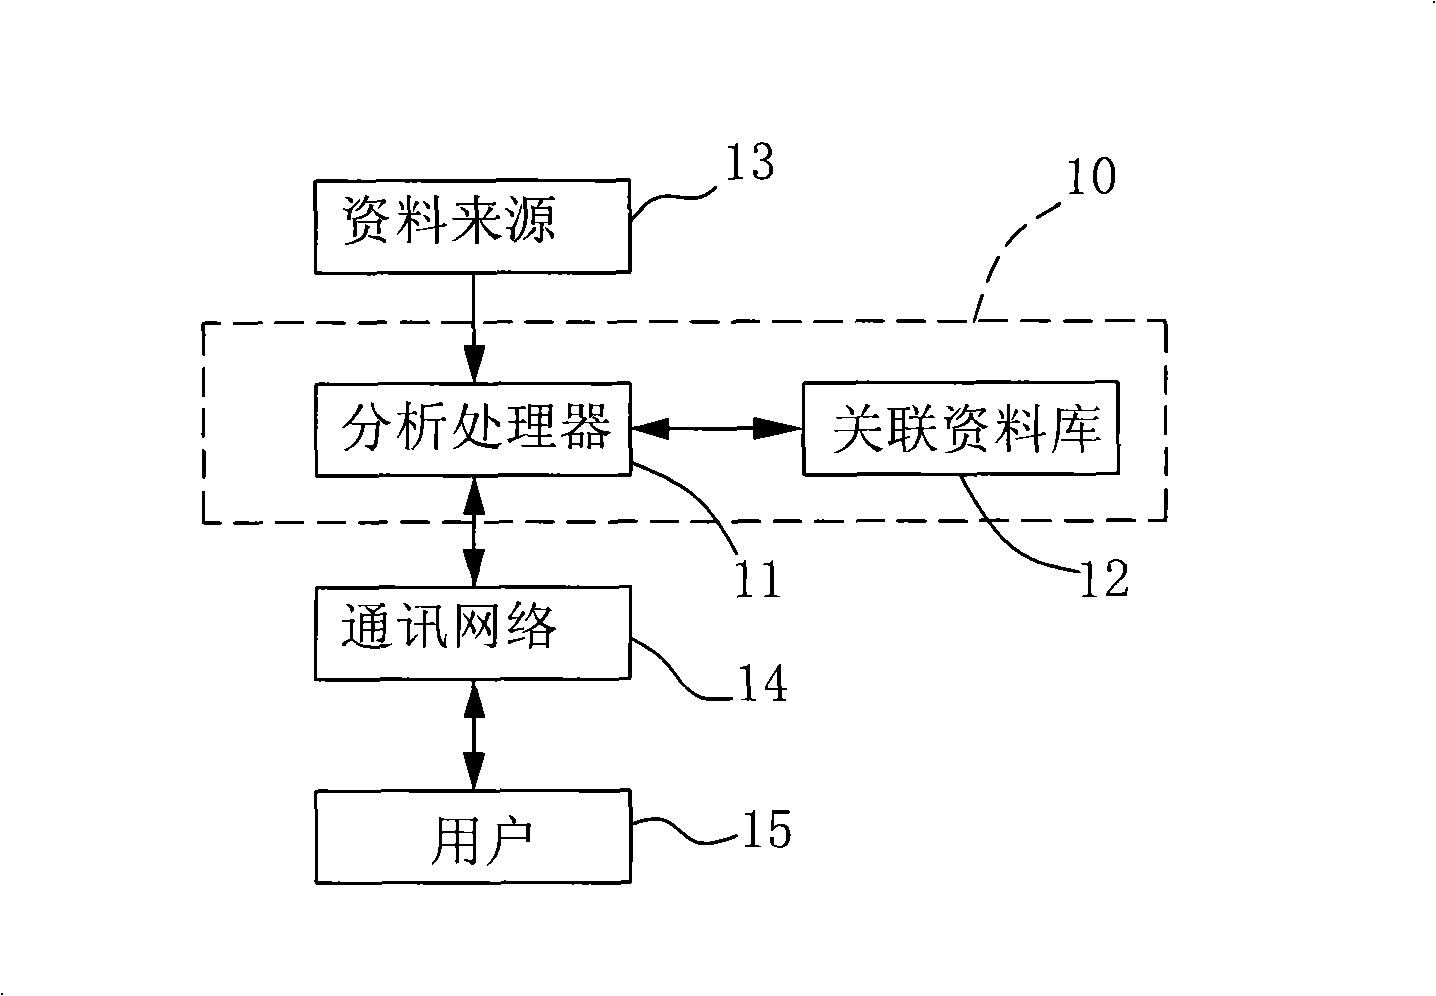 System and method for broadcasting securities information